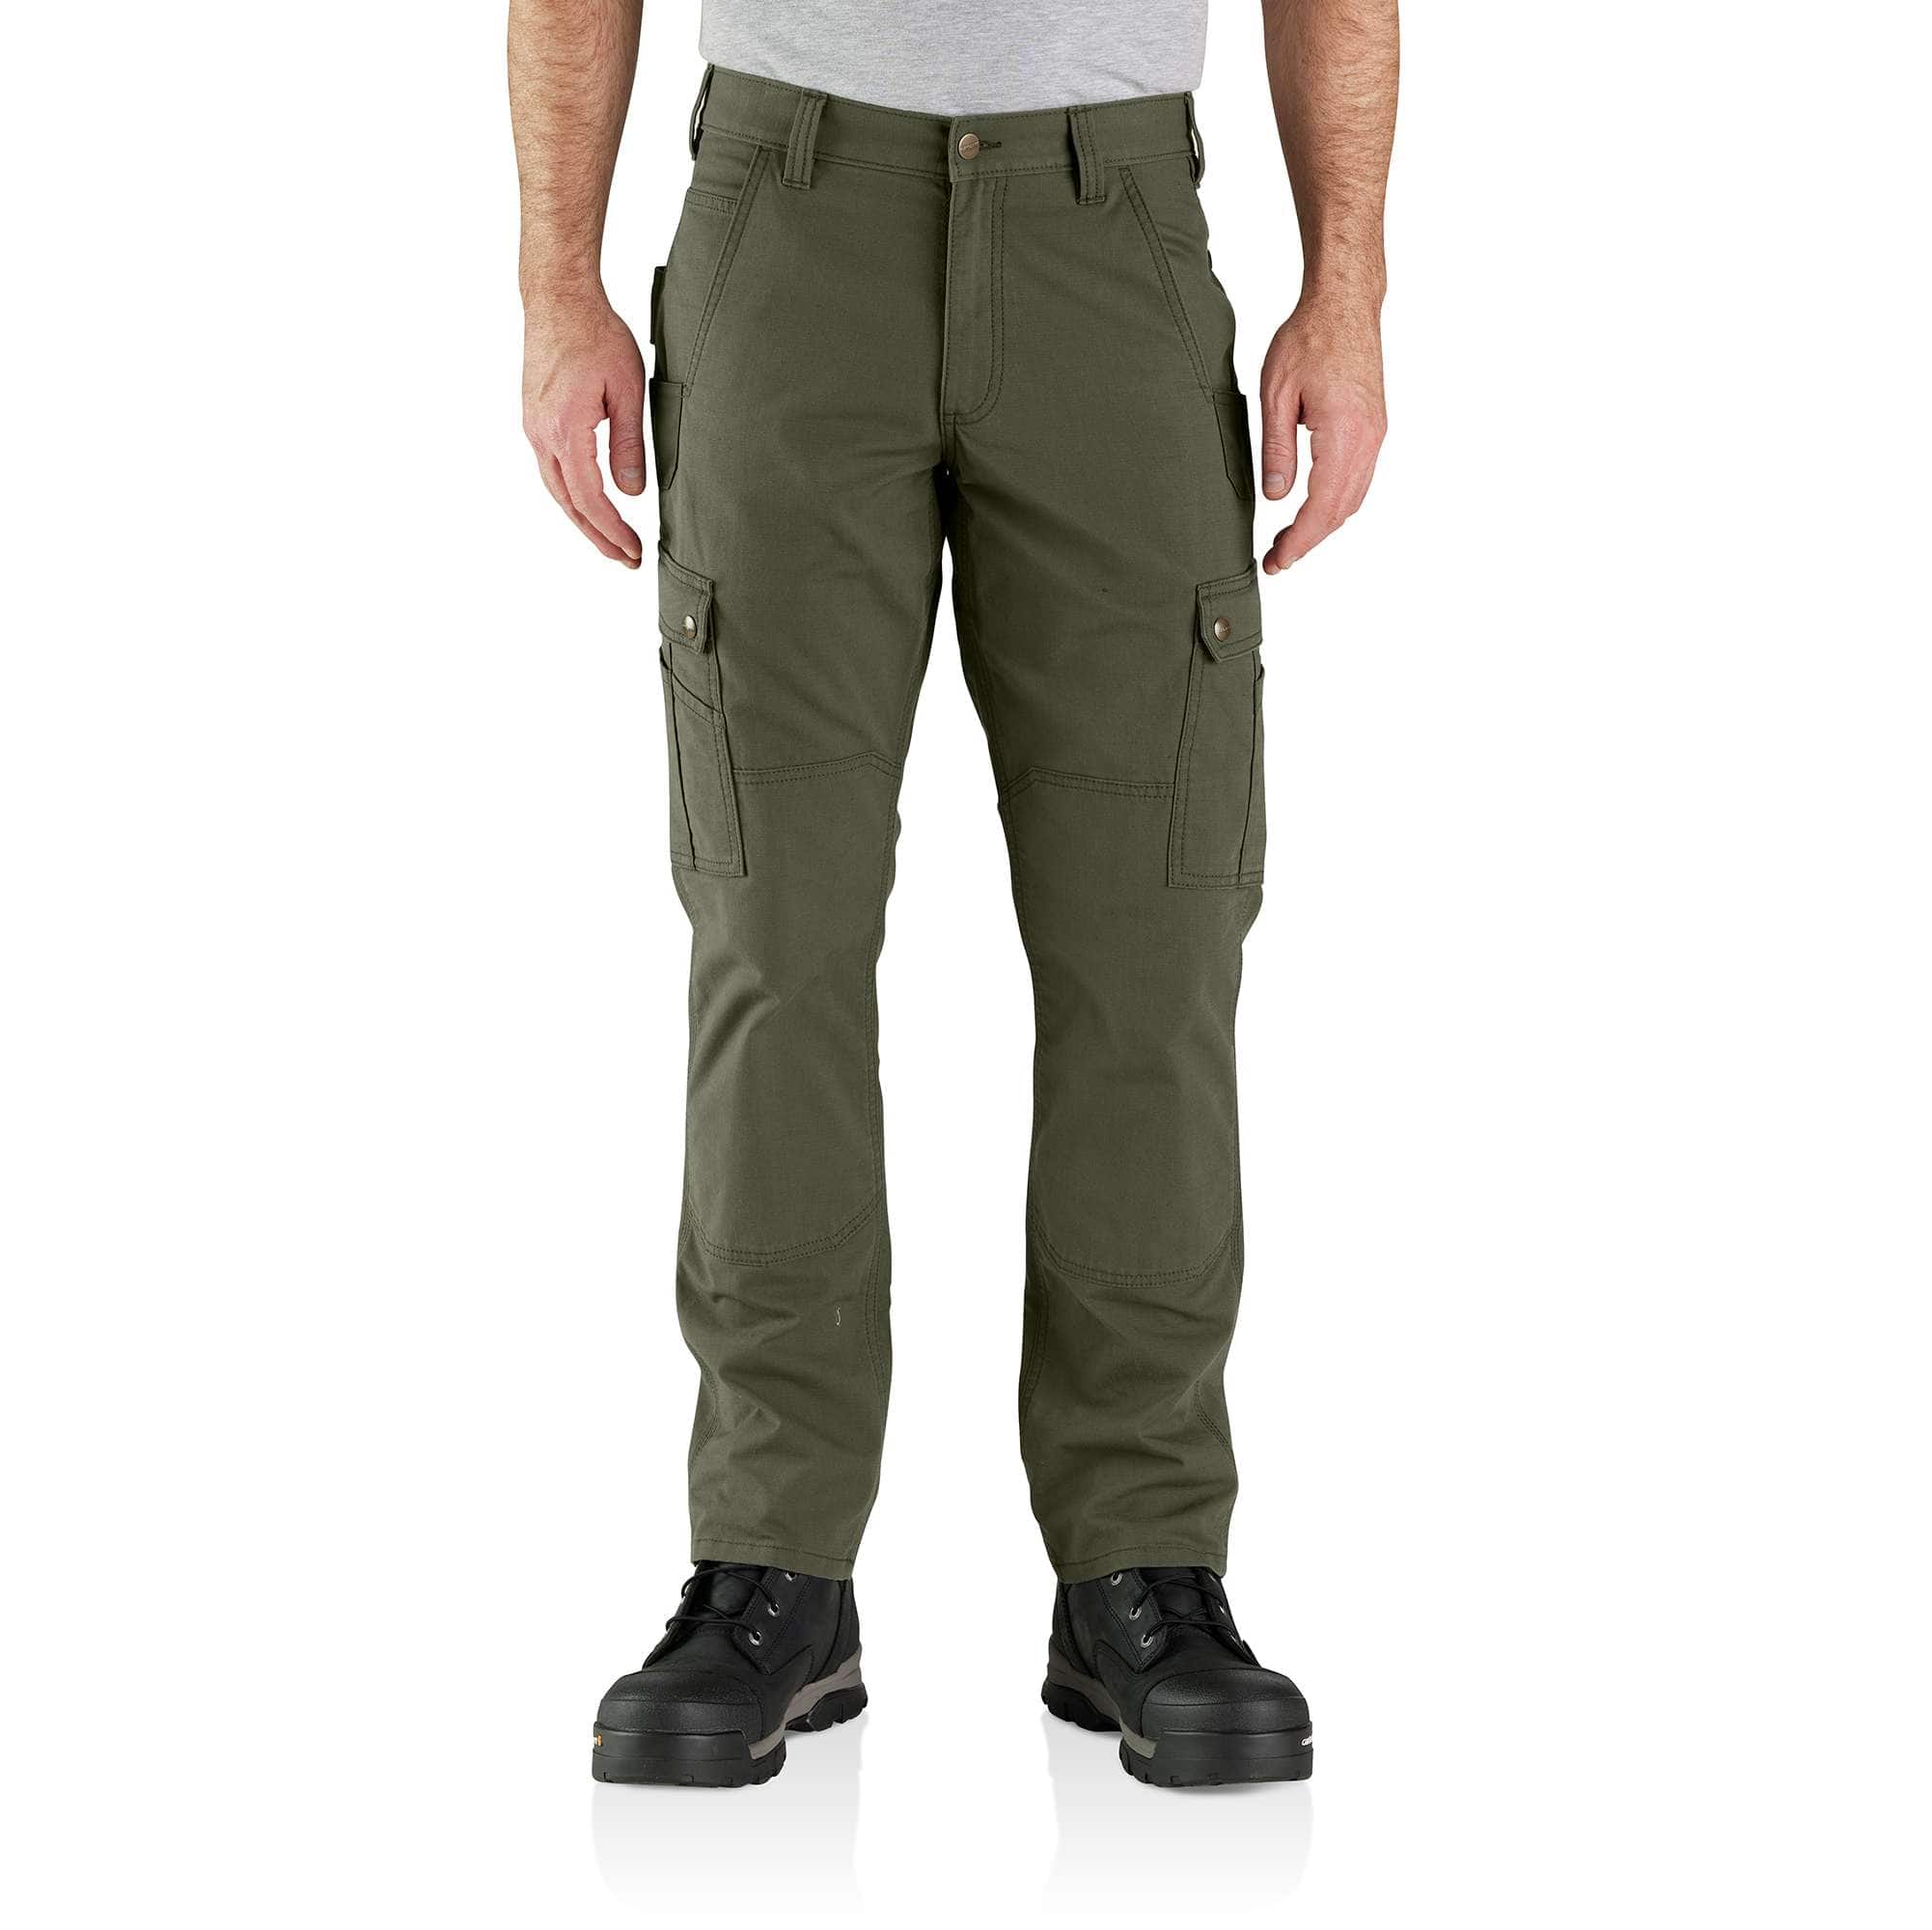 RUGGED FLEX RELAXED FIT PANT | WORK CARGO RIPSTOP Carhartt®